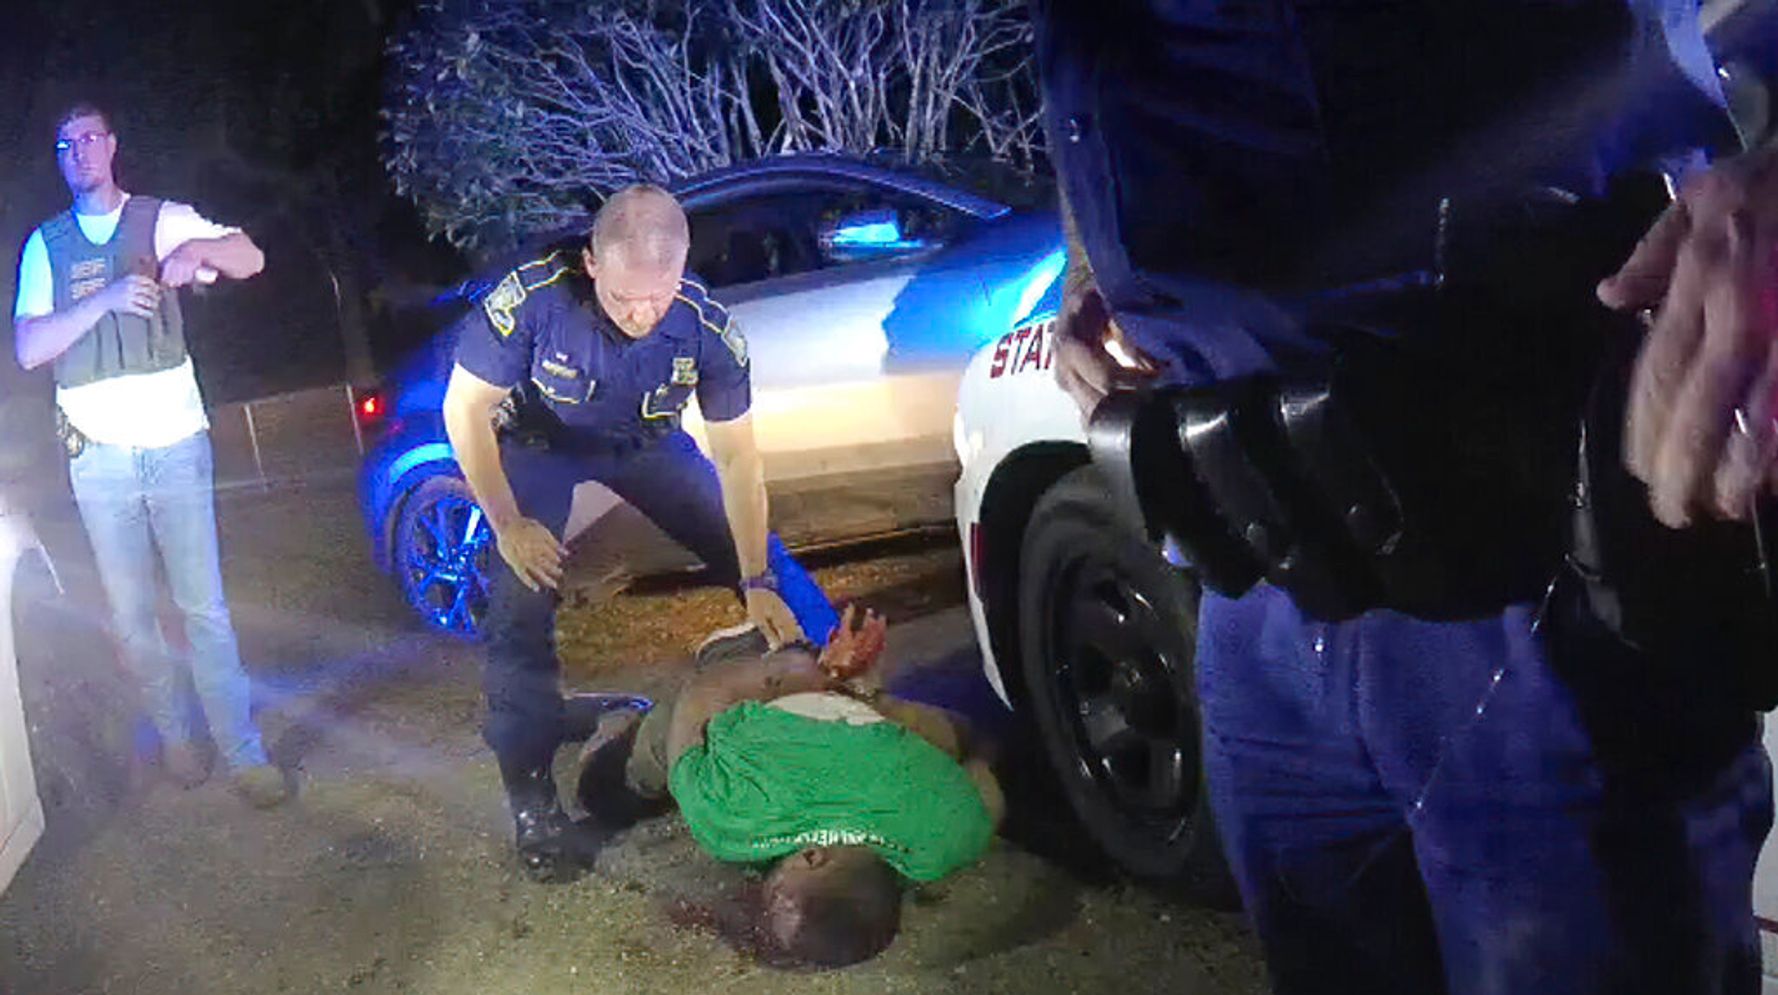 Officer Withheld Video Of Ronald Greene's Deadly Arrest For Nearly 2 Years